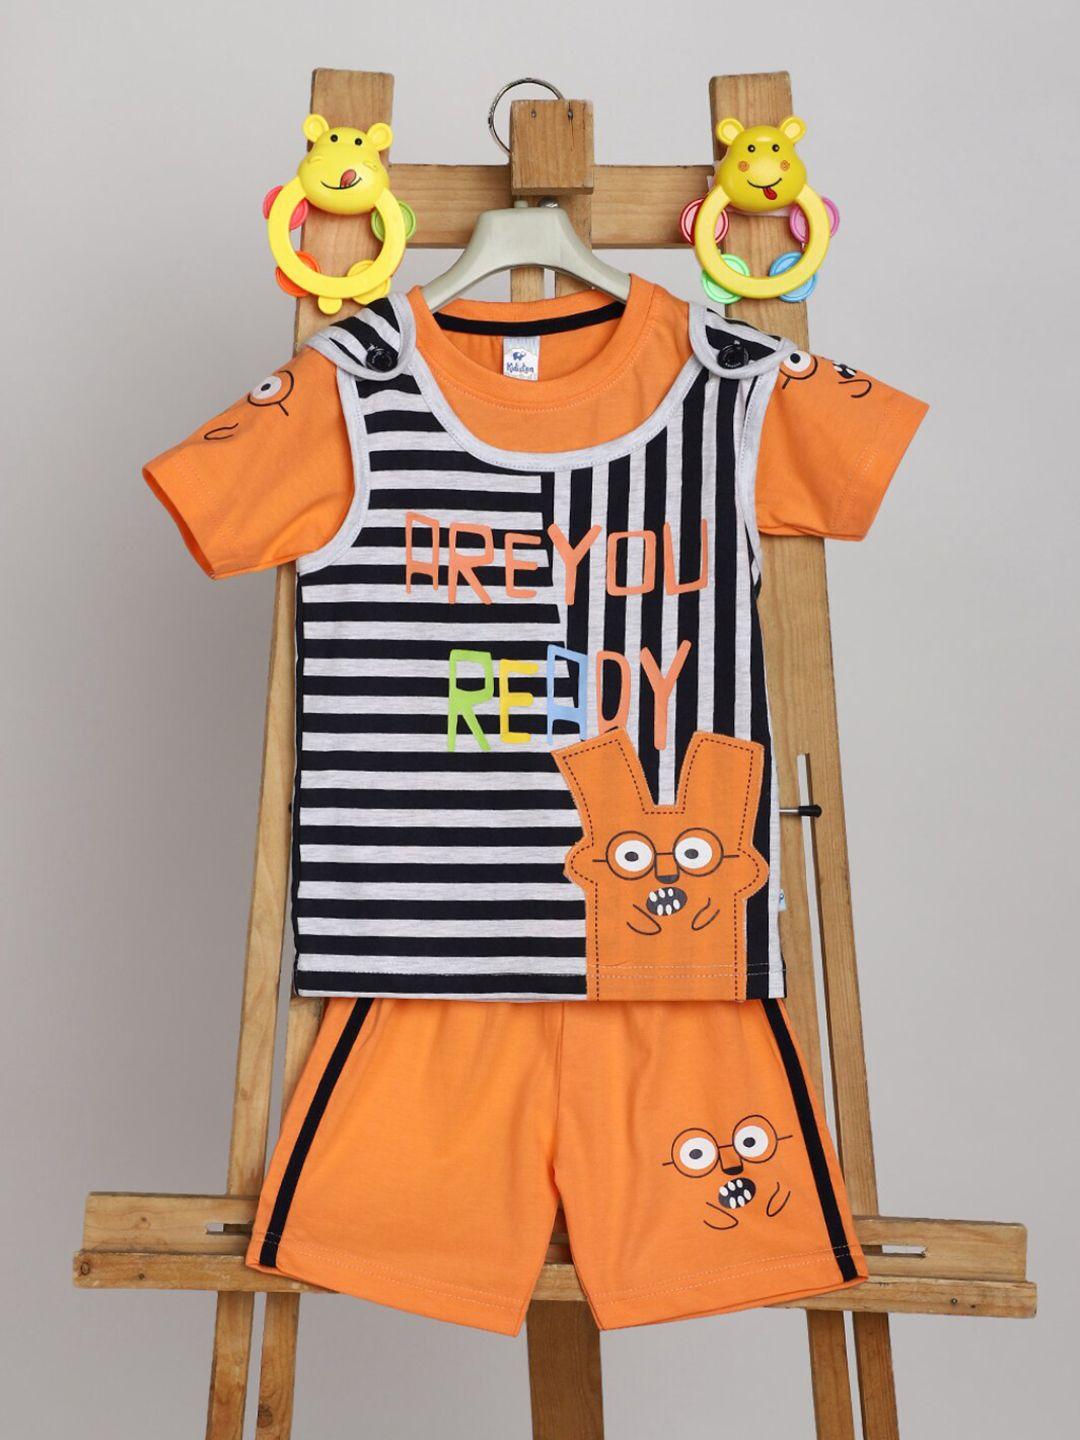 v-mart infants graphic printed pure cotton t-shirt with shorts